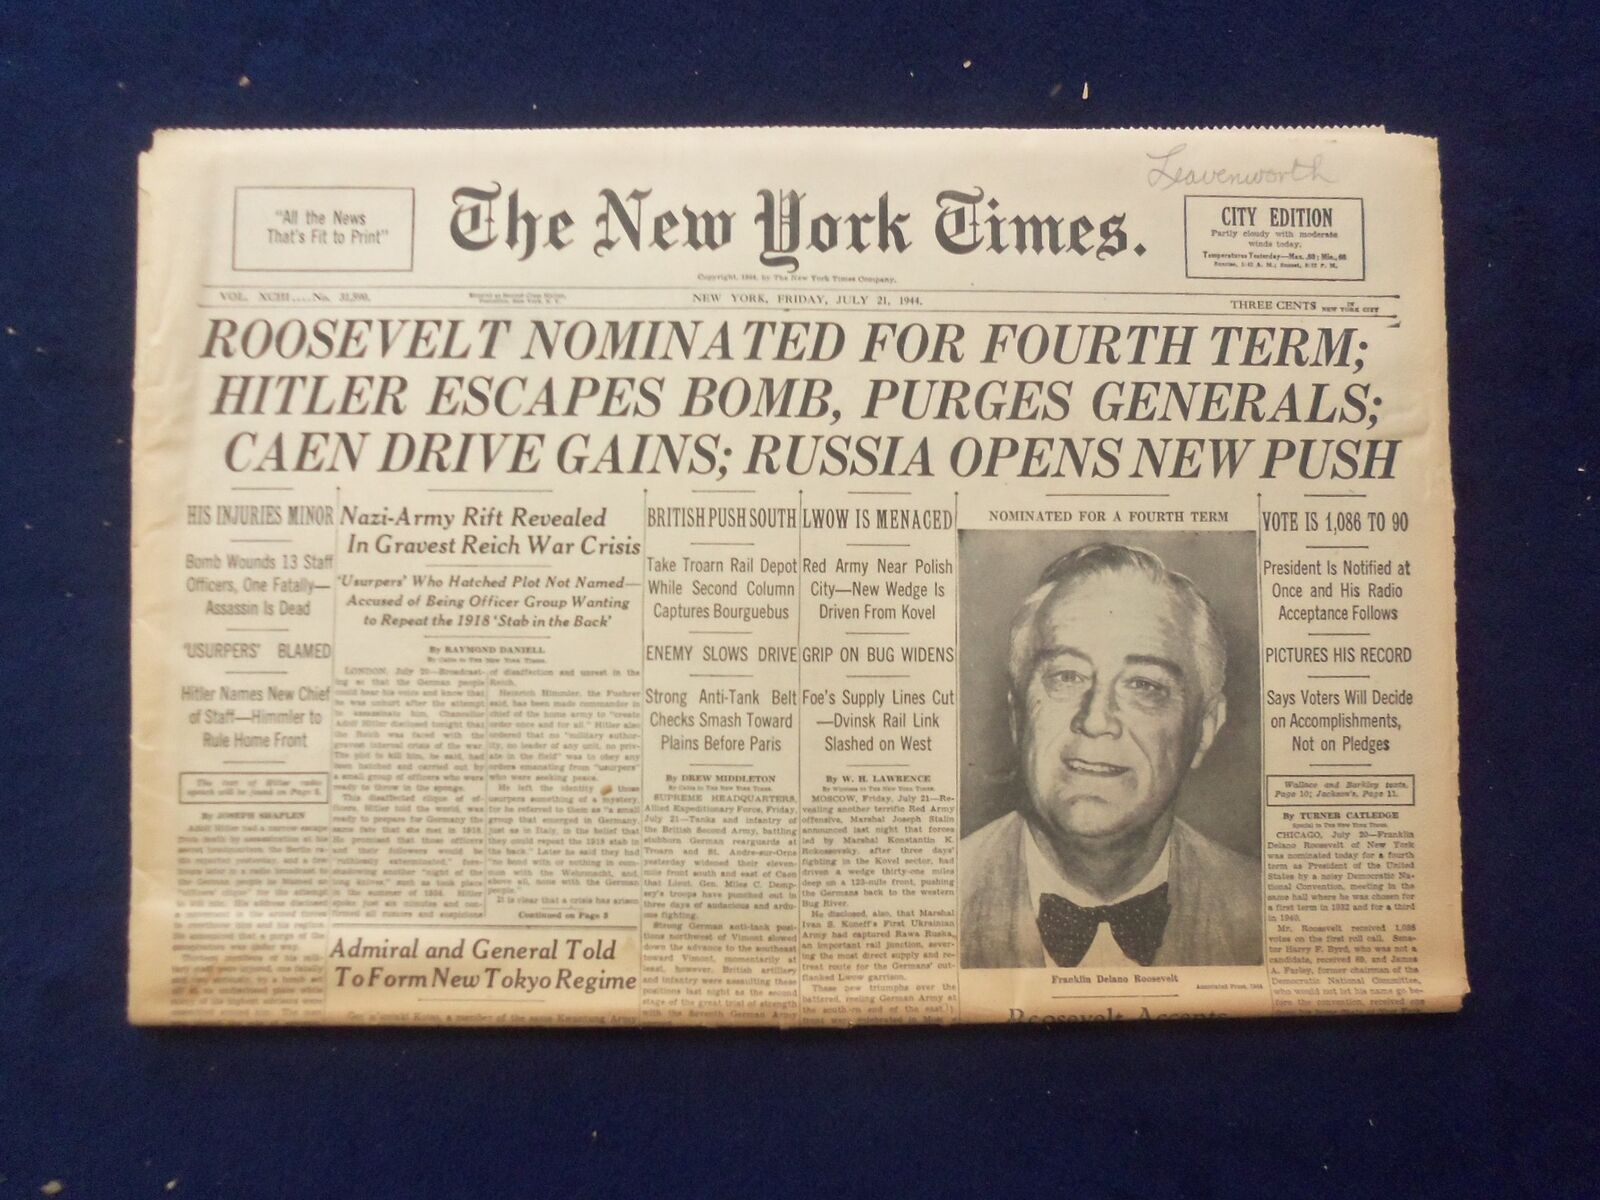 1944 JULY 21 NEW YORK TIMES - ROOSEVELT NOMINATED FOR FOURTH TERM - NP 6473